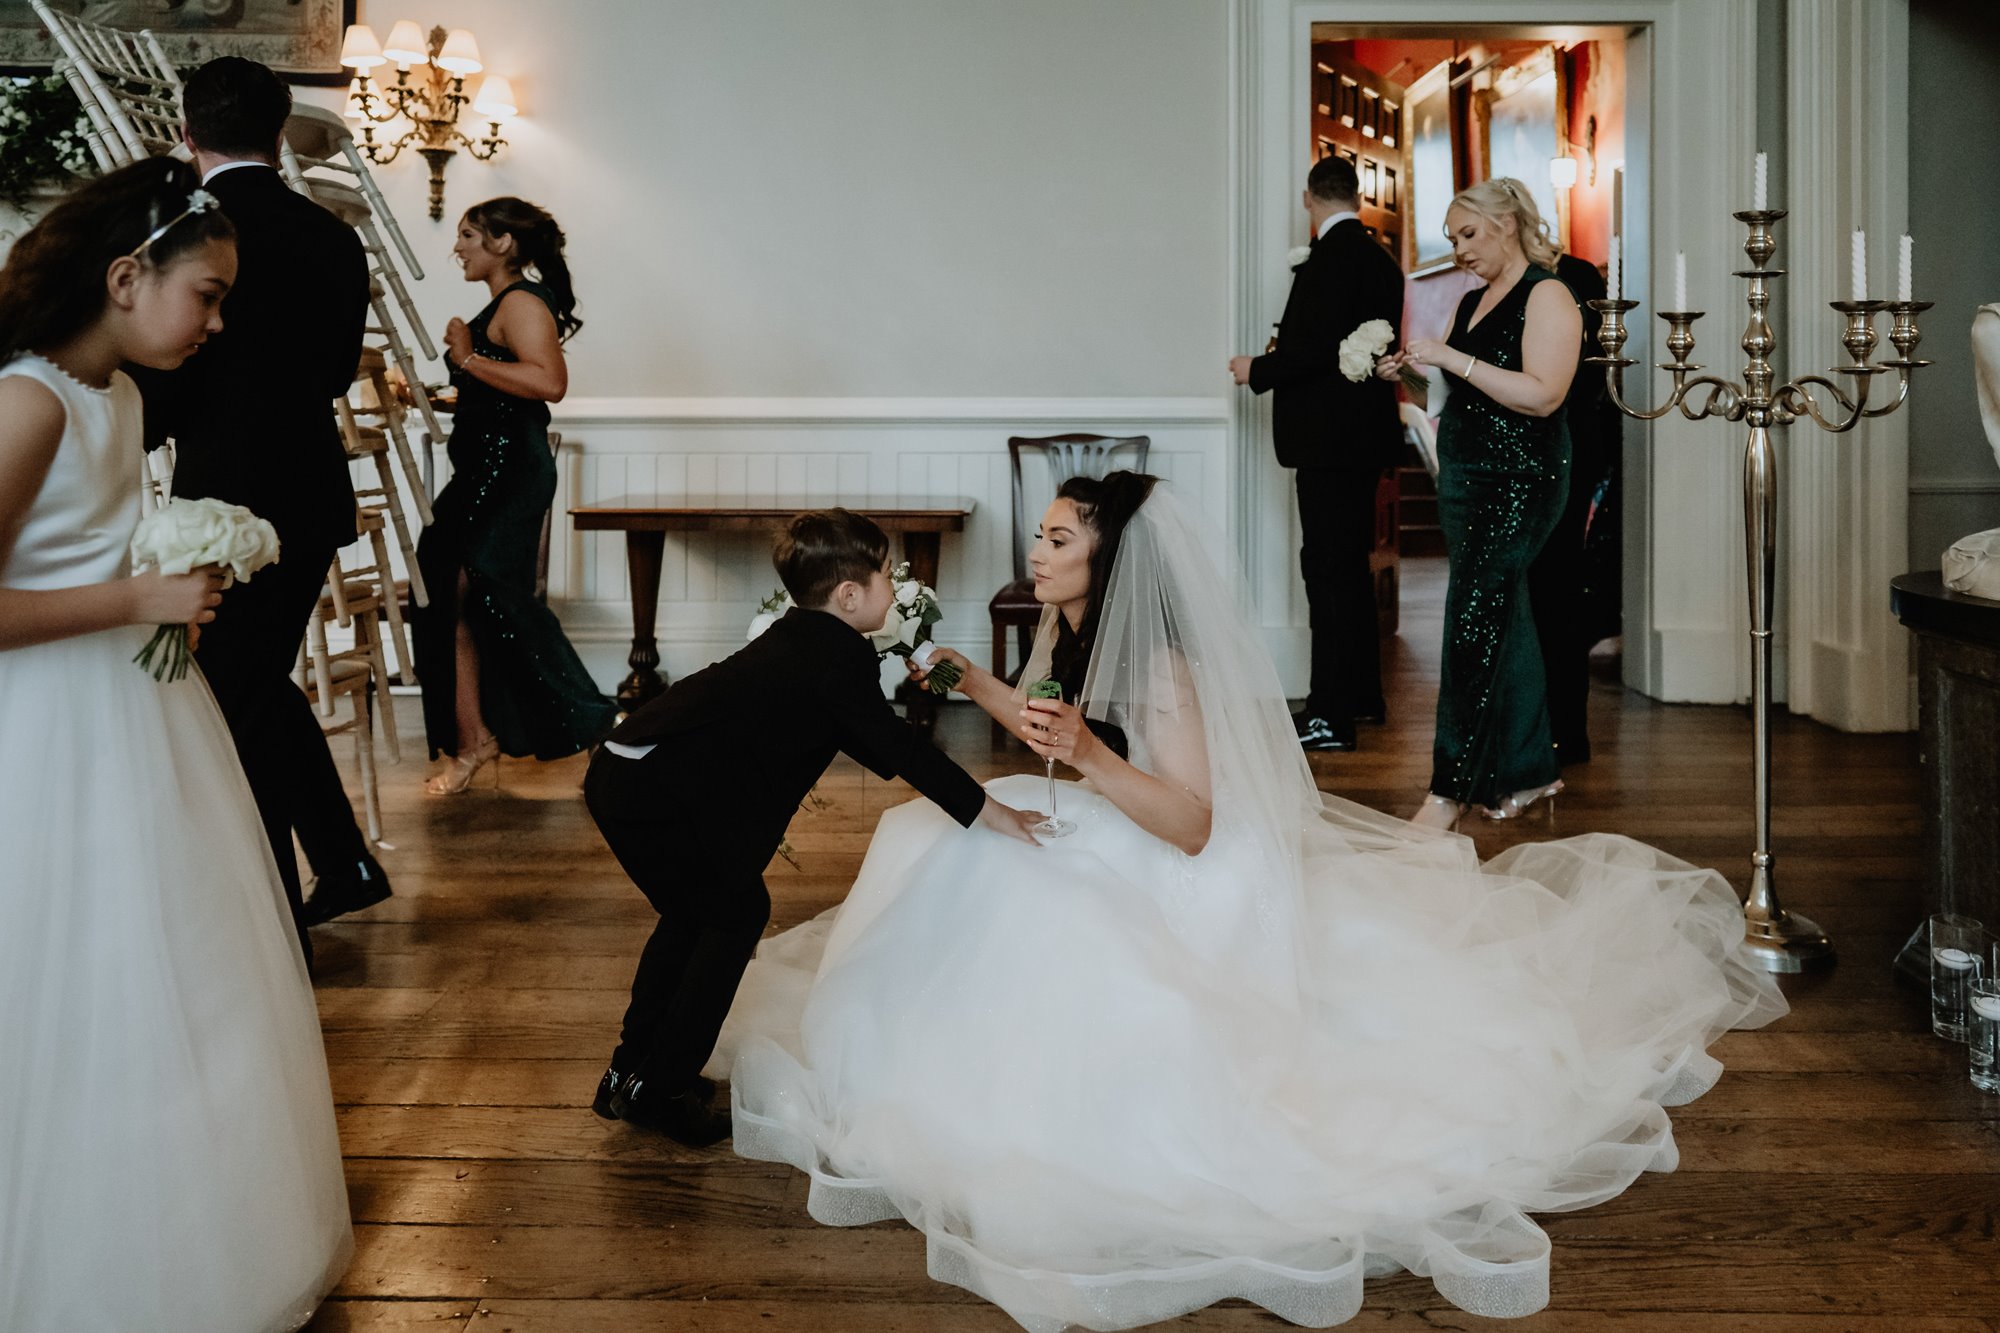 Bride kneeling down to hug a young family member at her wedding